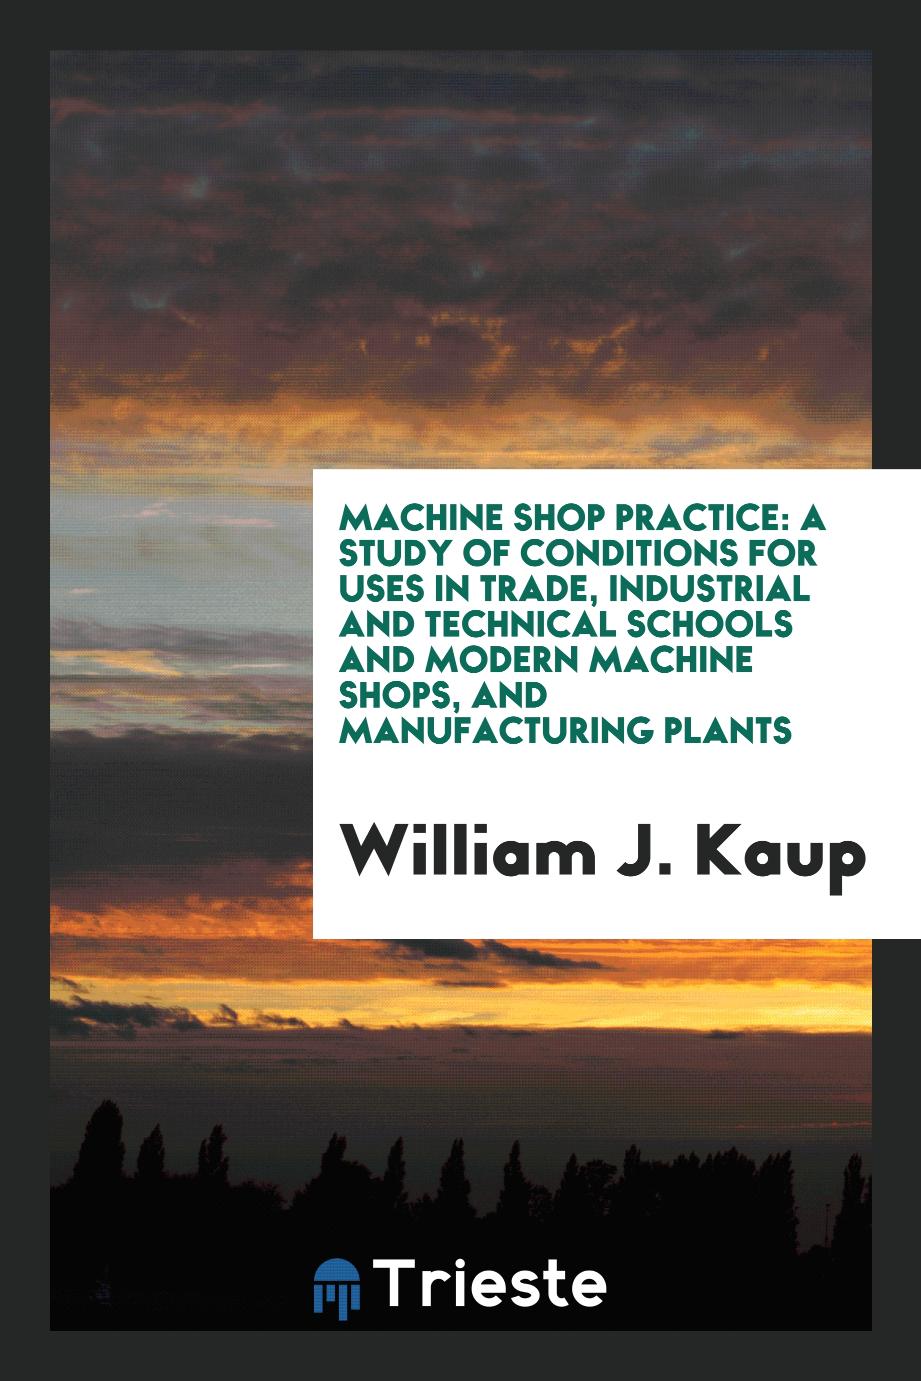 Machine Shop Practice: A Study of Conditions for Uses in Trade, Industrial and Technical Schools and Modern Machine Shops, and Manufacturing Plants